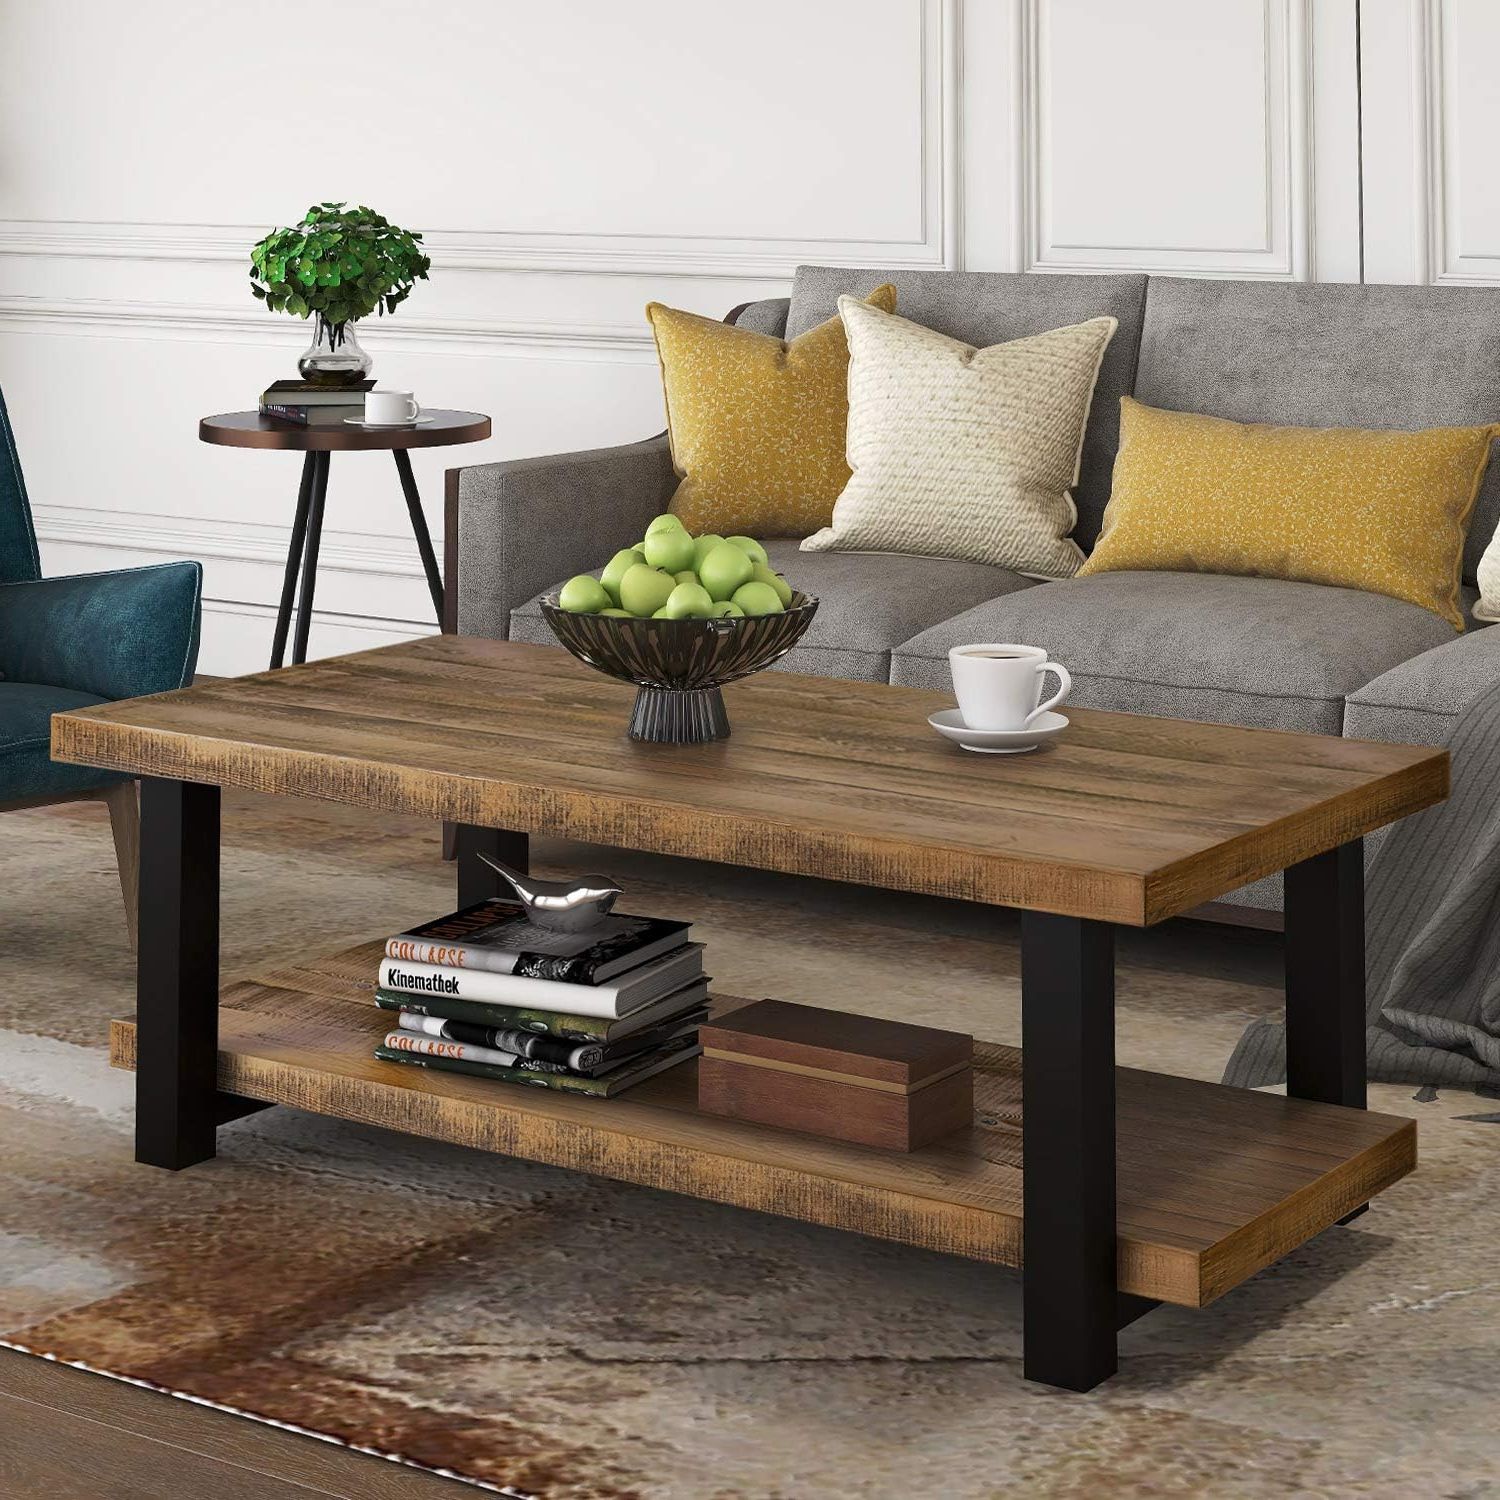 2020 Pemberly Row Replicated Wood Coffee Tables In Amazon: Knocbel Farmhouse Coffee Table For Living Room, Sofa Side  (View 10 of 15)